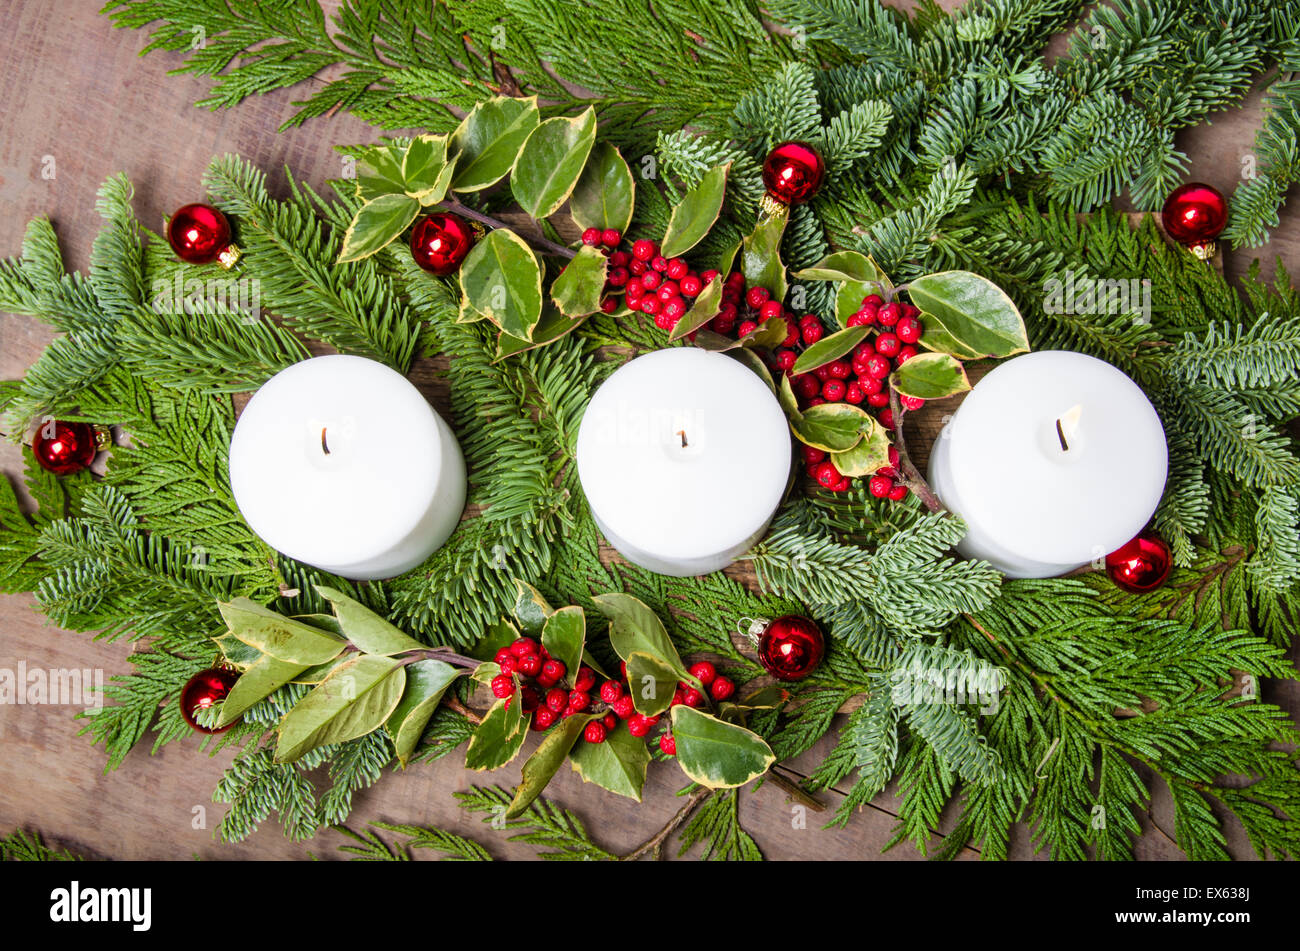 An evergreen Christmas centerpiece with three white candles and holly berries Stock Photo